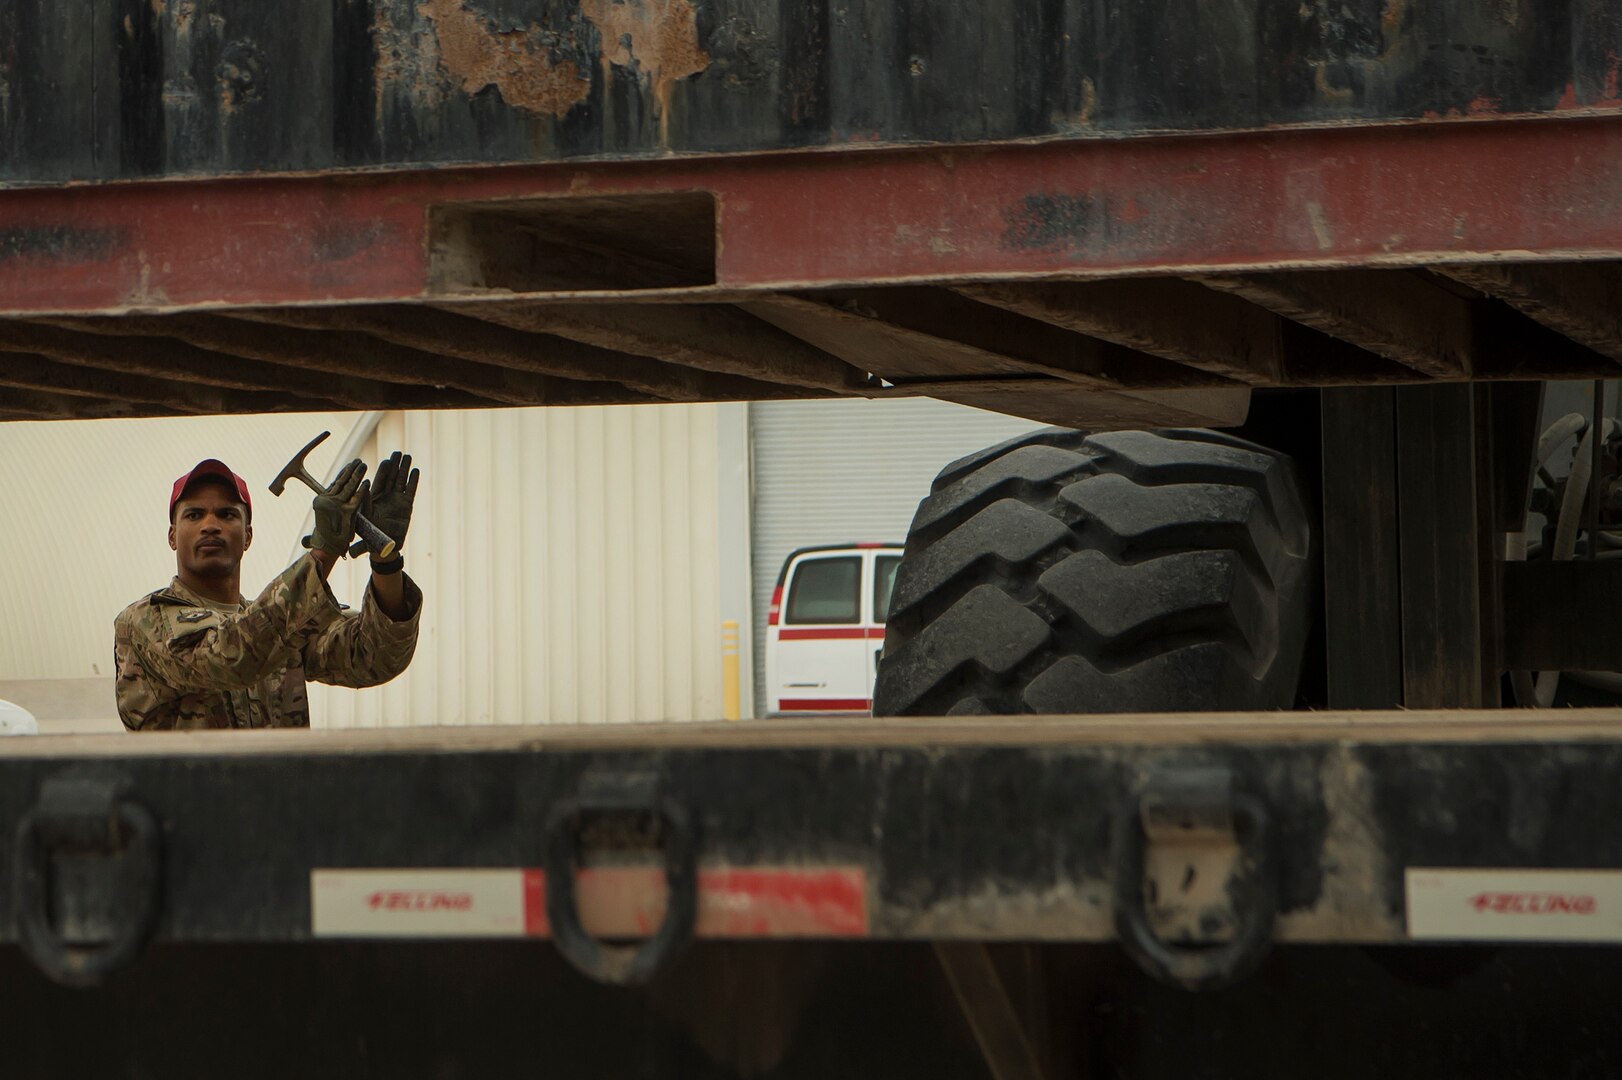 Staff Sgt. Sterling Benford, 557th Expeditionary RED HORSE Squadron supply NCO in charge, guides the movement of a large container at Al Udeid Air Base, Qatar, April 3, 2019. Benford is responsible for the accountability of 1st Expeditionary Civil Engineer Group assets at deployed locations across U.S. Central Command (CENTCOM). Logistics Airmen were vital in the completion of more than 400 construction missions across the CENTCOM theater during a six-month period. (U.S. Air Force photo by Tech. Sgt. Christopher Hubenthal)